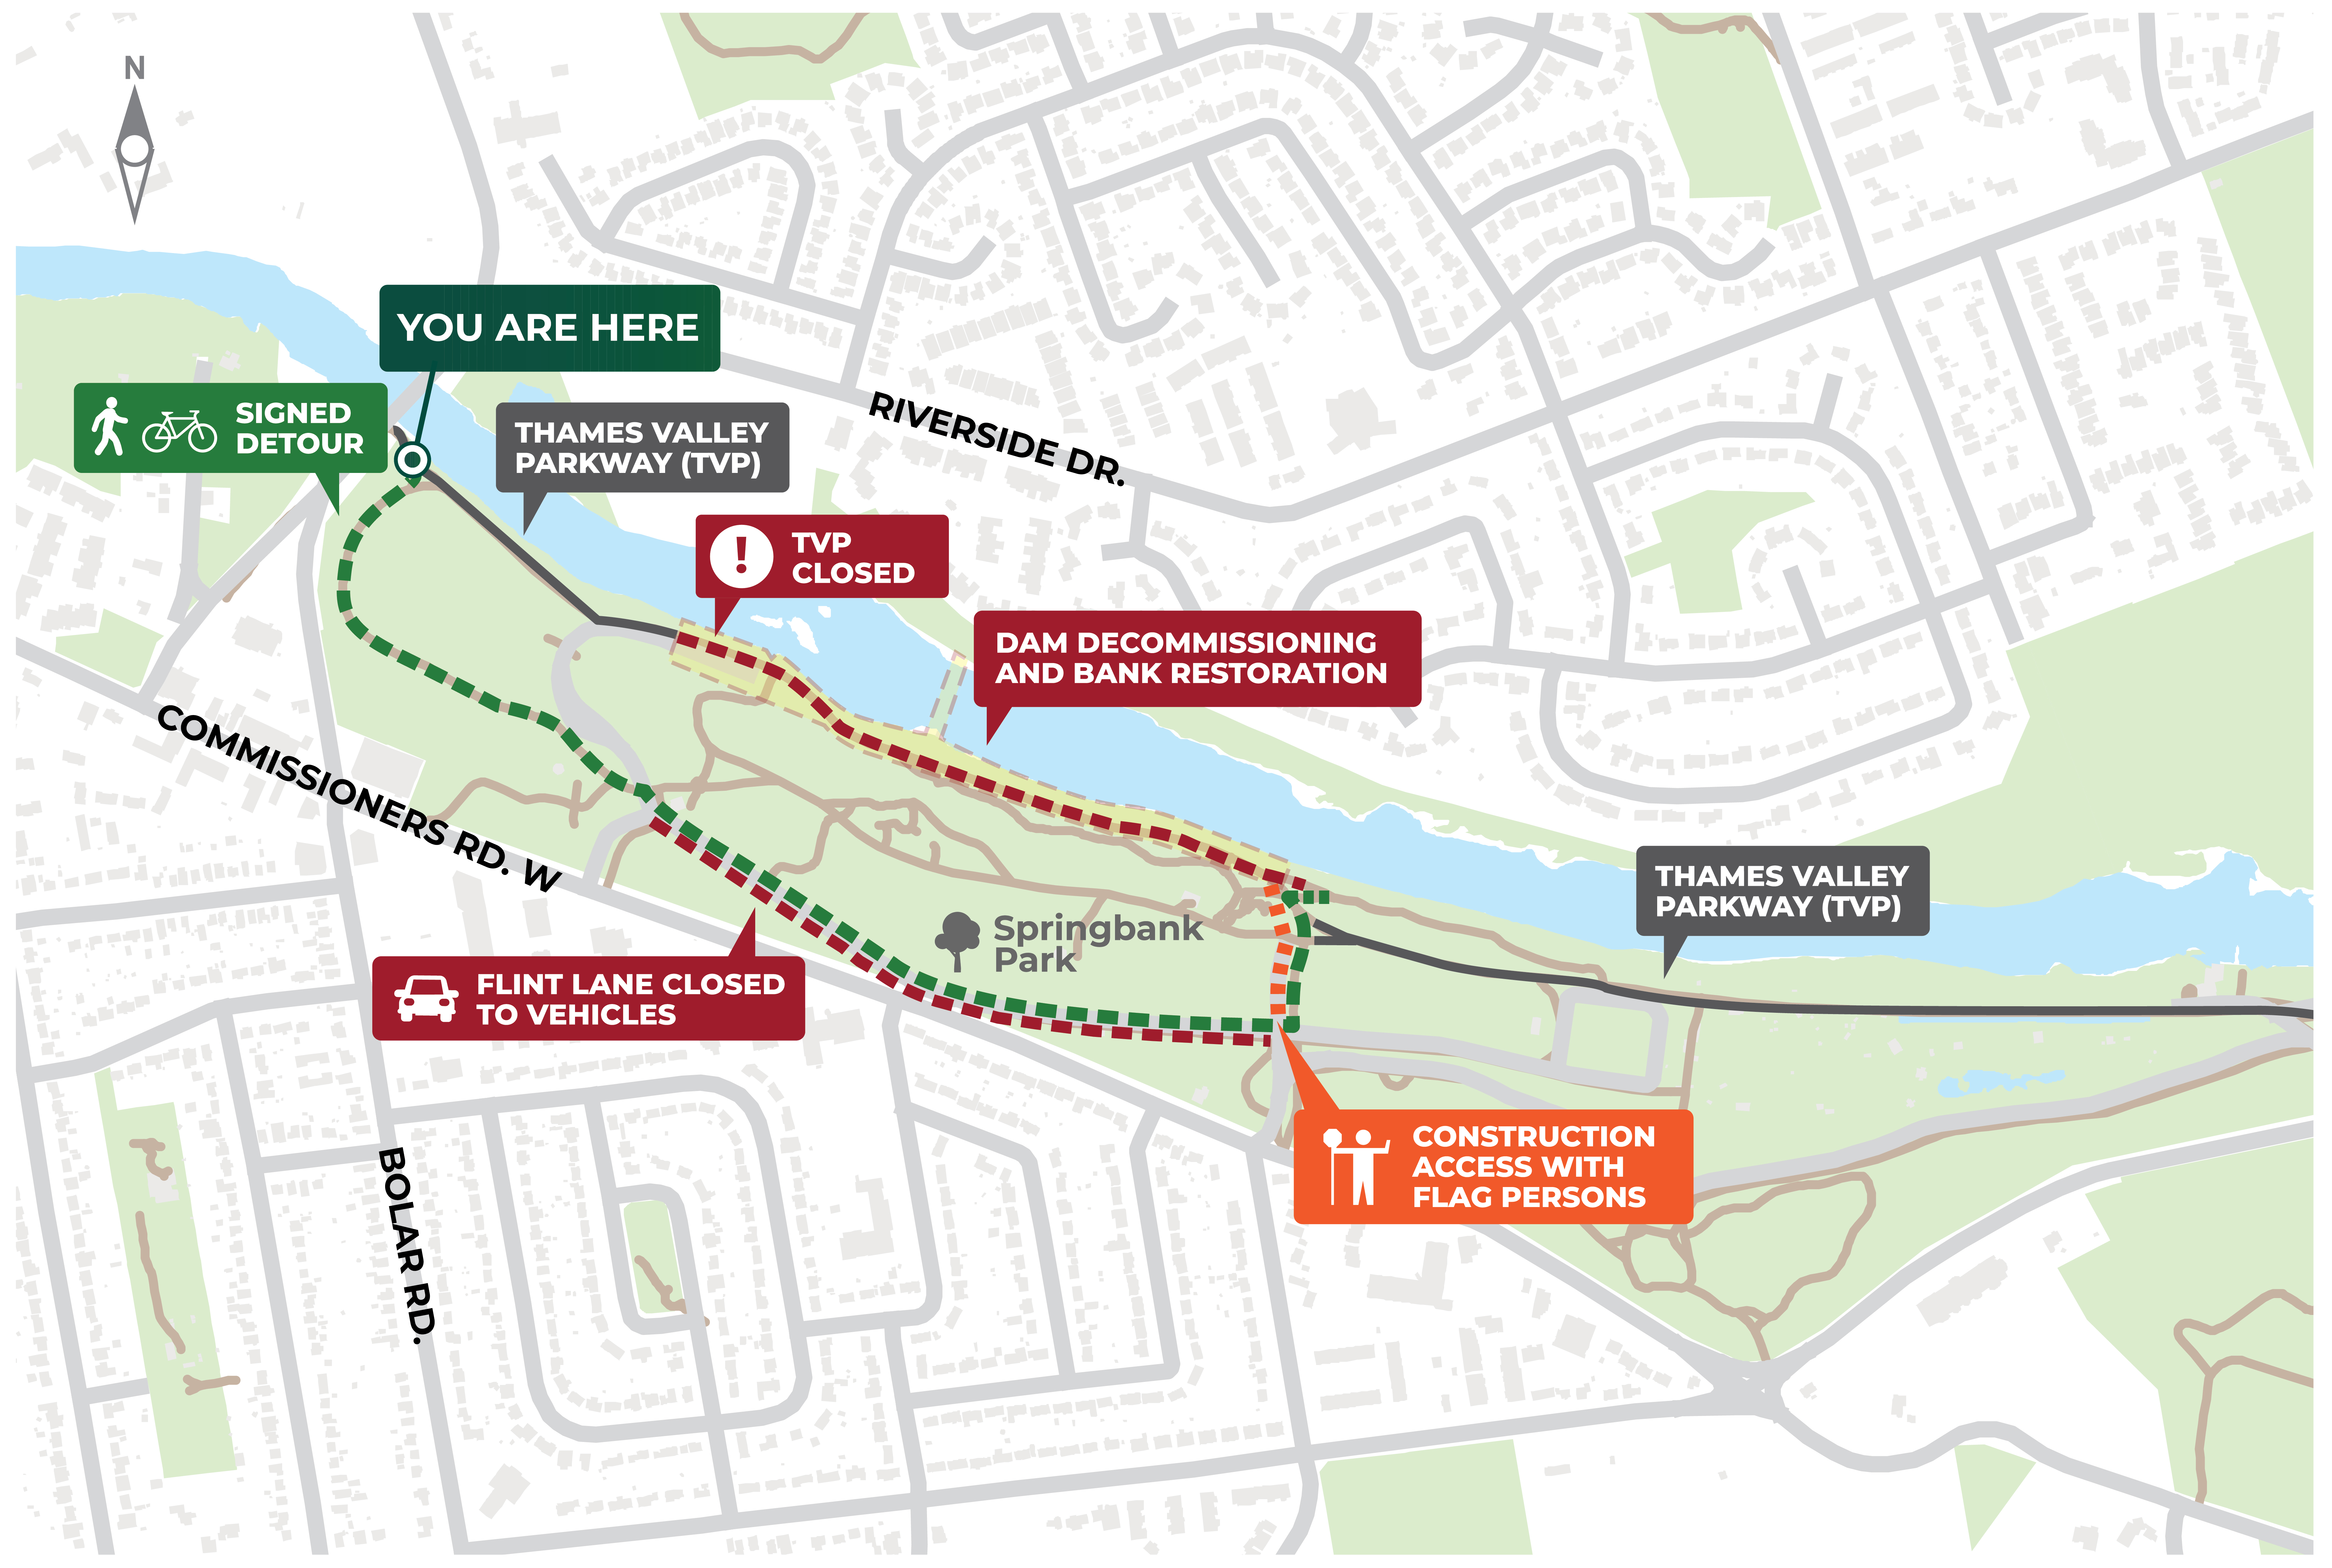 A map with a green detour line in Springbank Park for the Thames Valley Parkway.